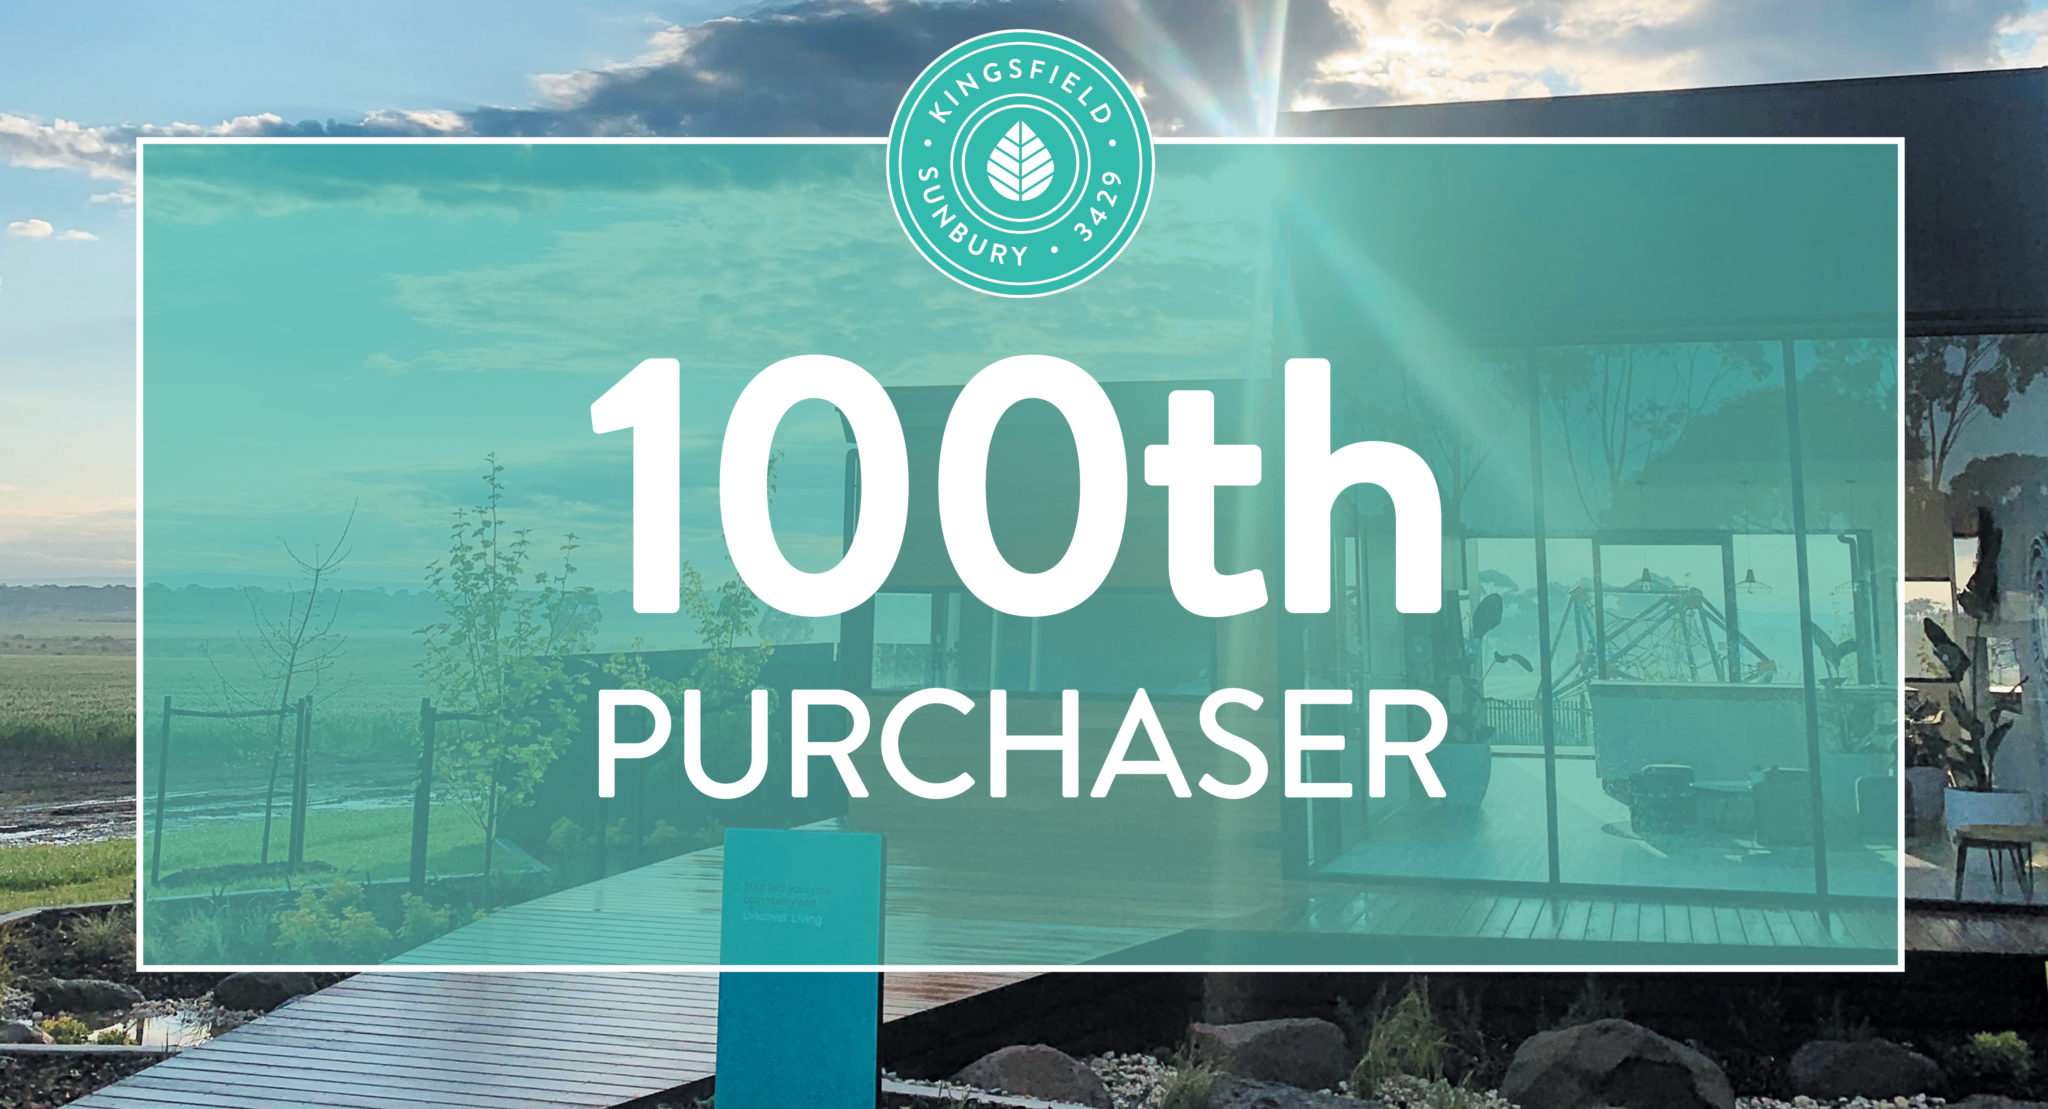 Kingsfield Welcomes Their 100th Purchaser!